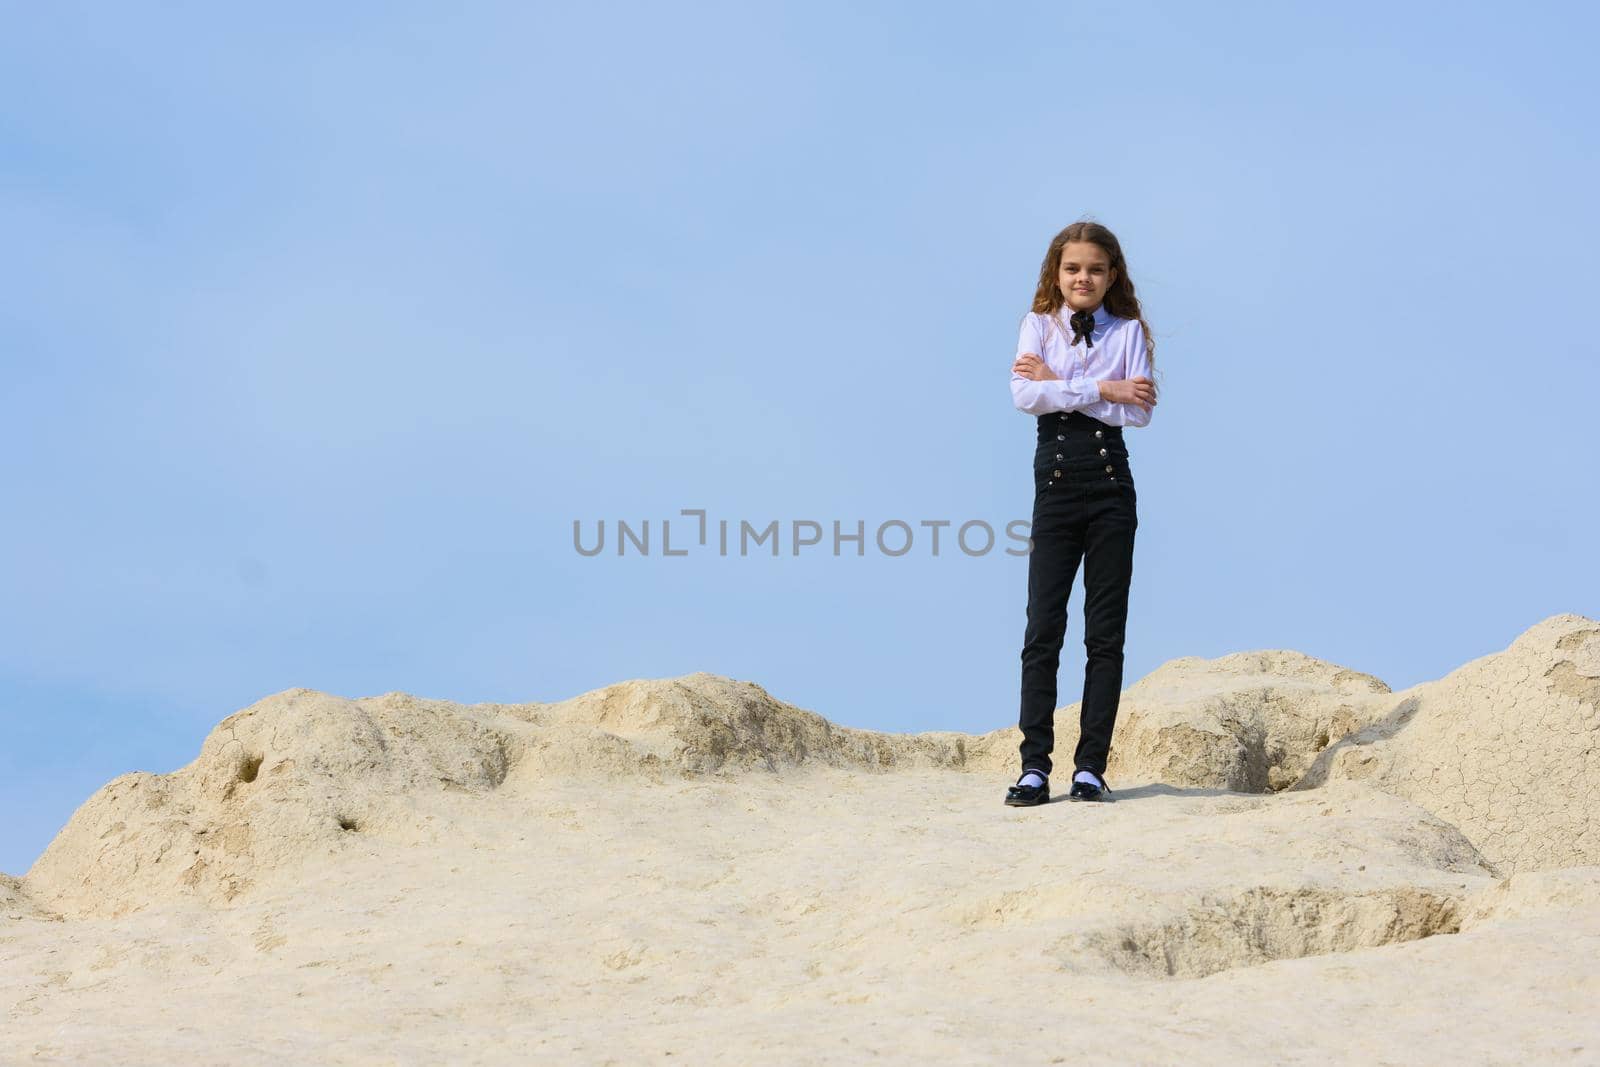 A girl in a white shirt with a bow tie stands on a mountain against the background of the sky